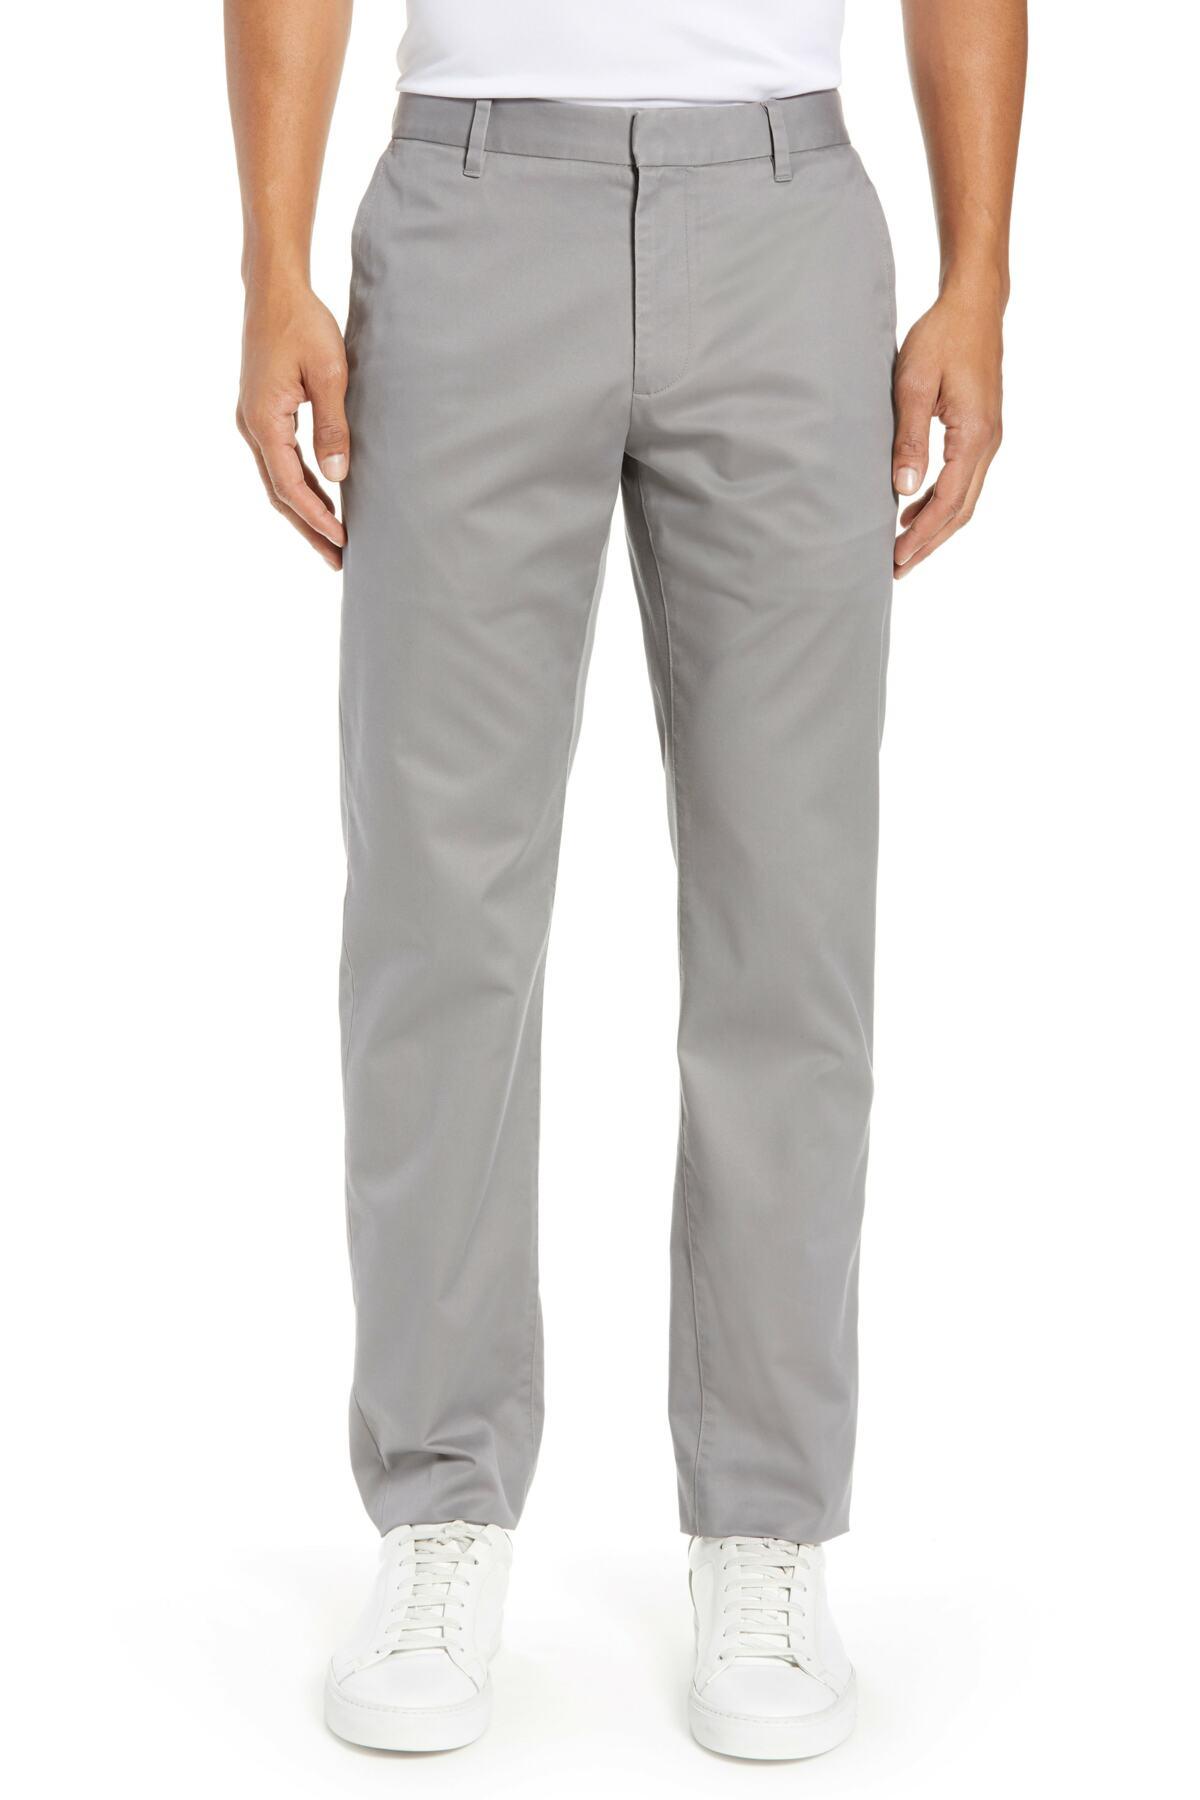 Lyst - Bonobos Weekday Warrior Slim Fit Stretch Dress Pants in Gray for ...